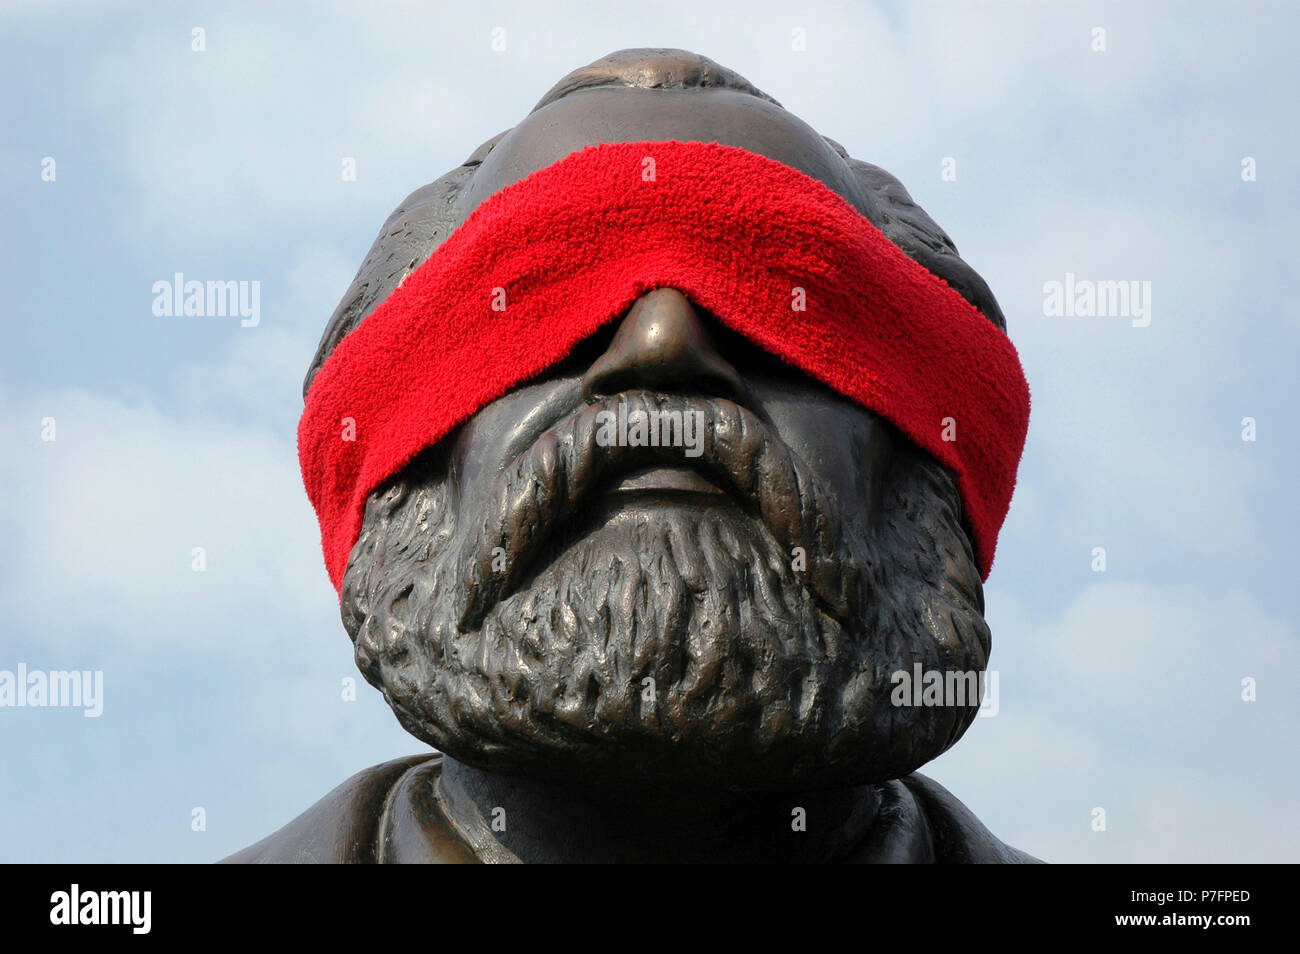 Symbol picture, statue of Karl Marx, blindfolded by a red scarf, Berlin, Germany Stock Photo